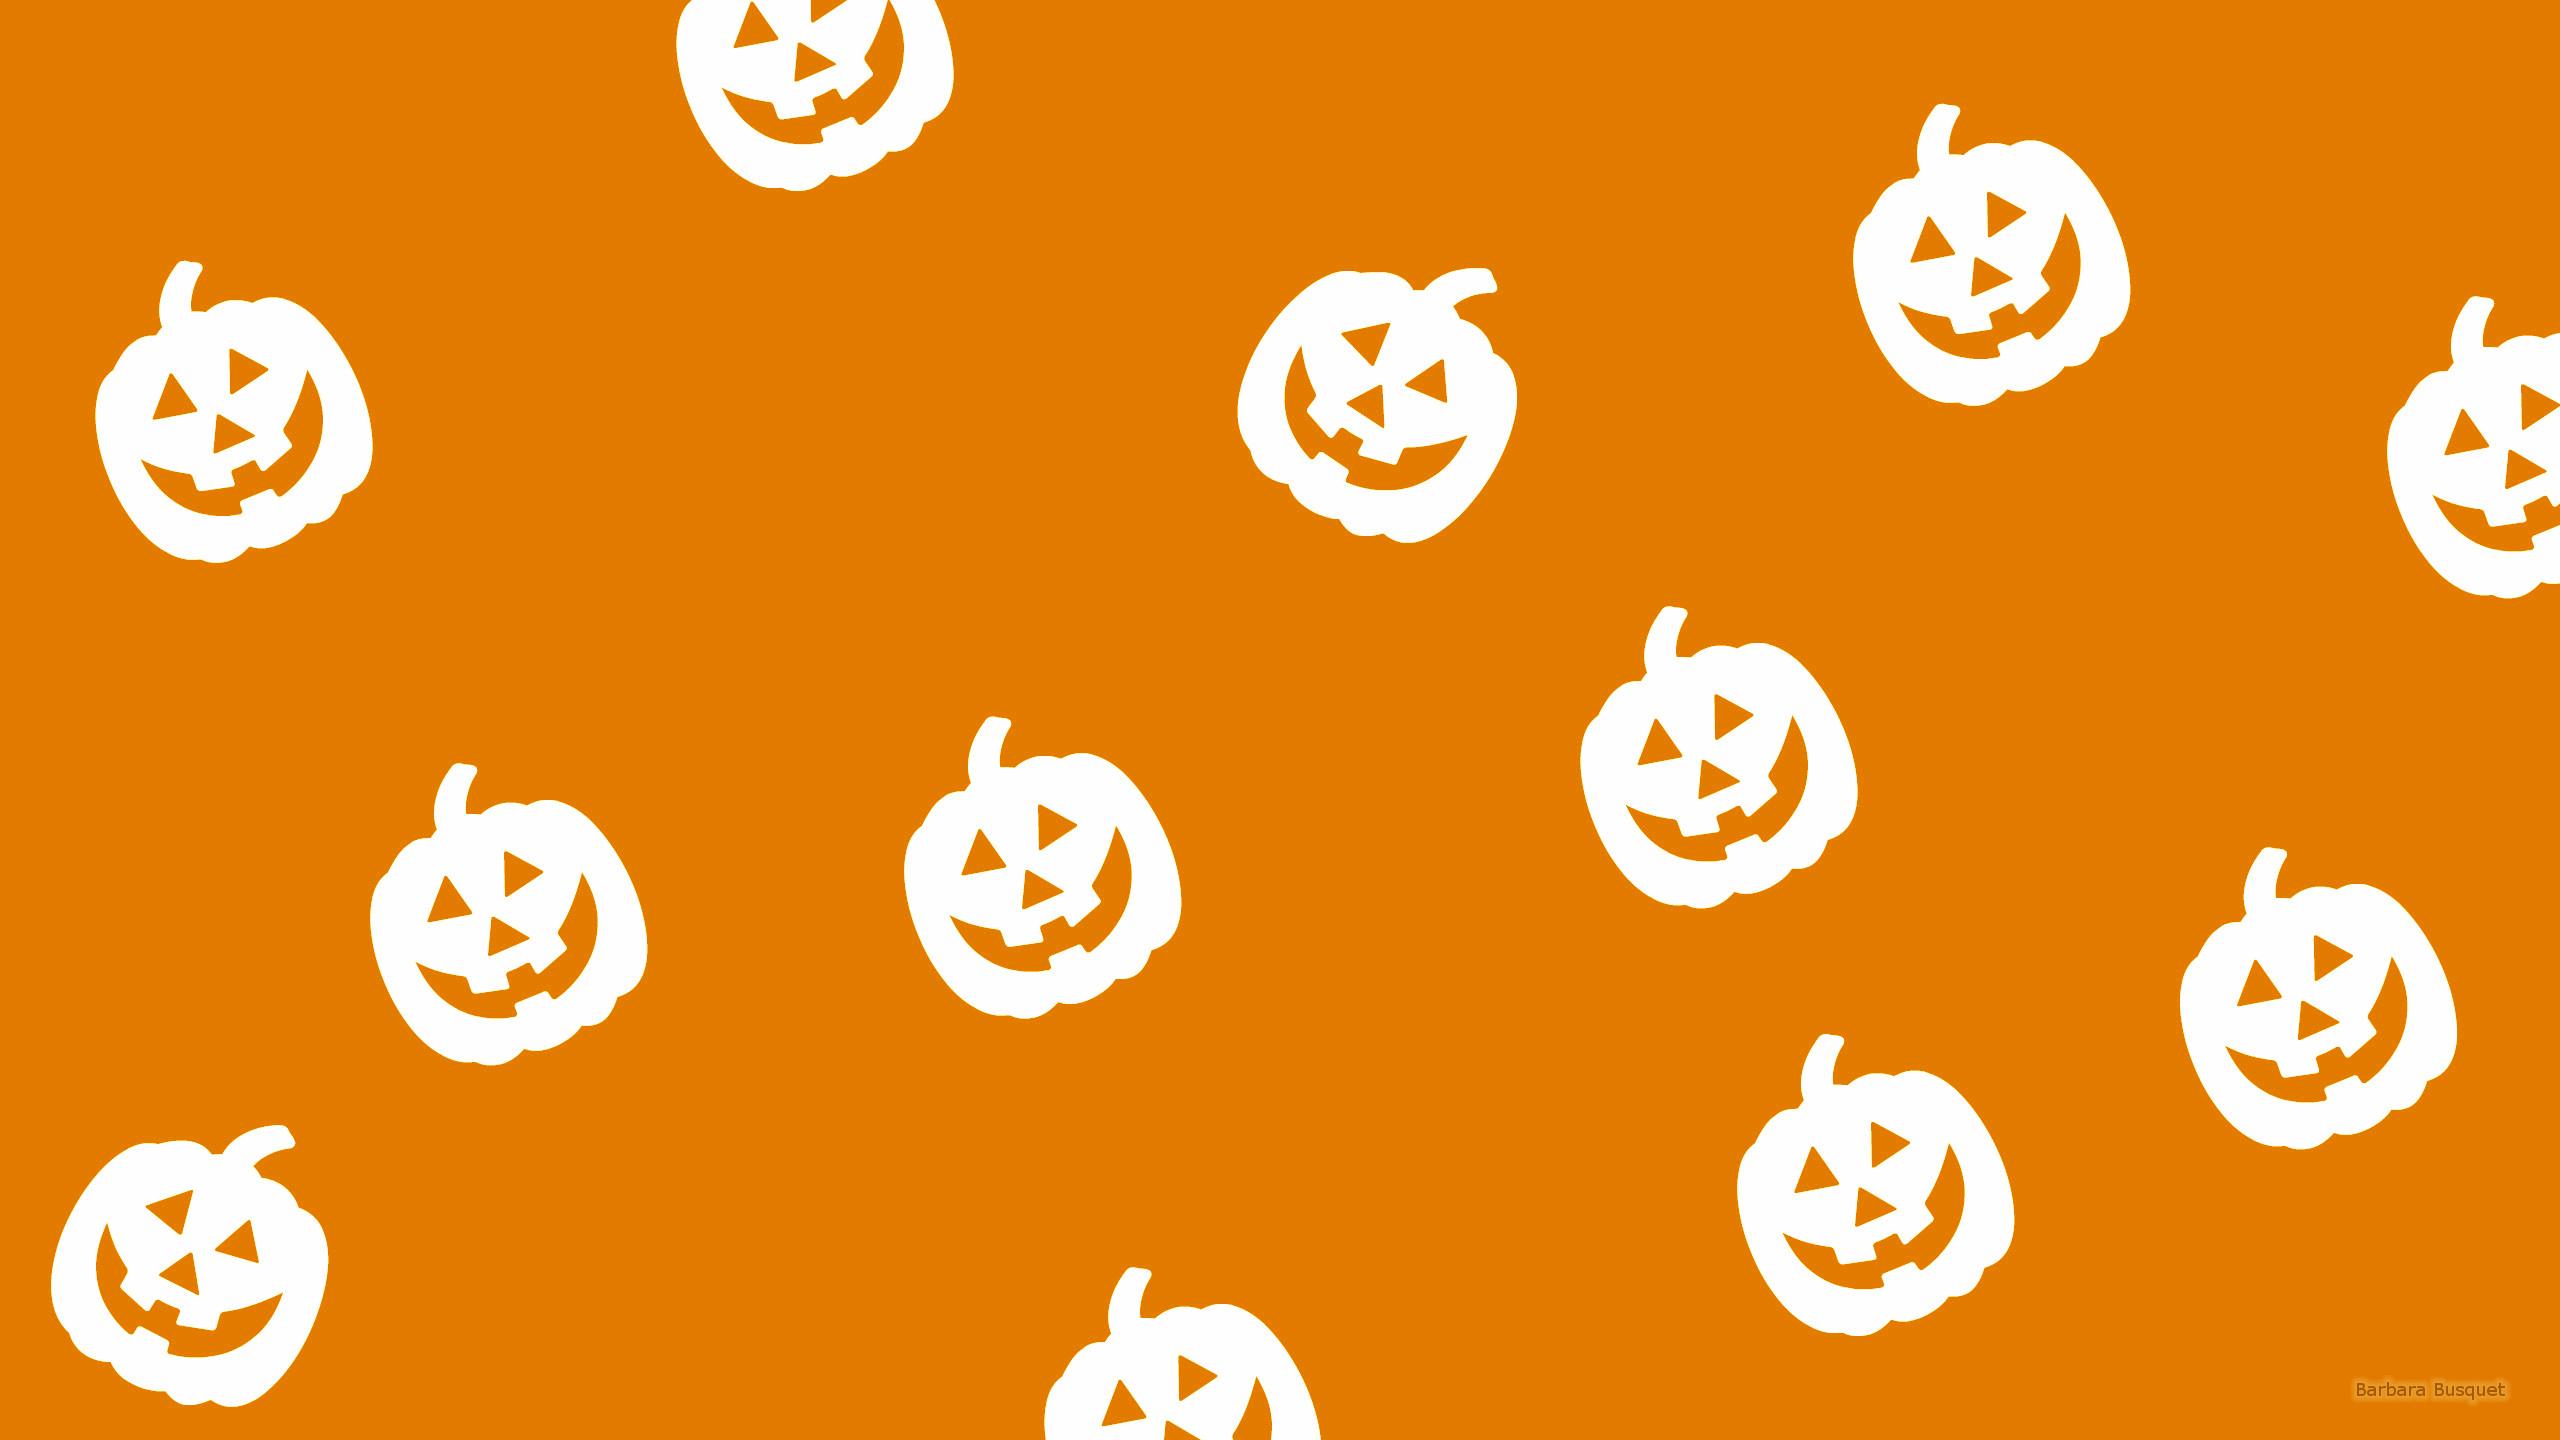 500+ Halloween background orange Design Ideas for Your Spooky Projects